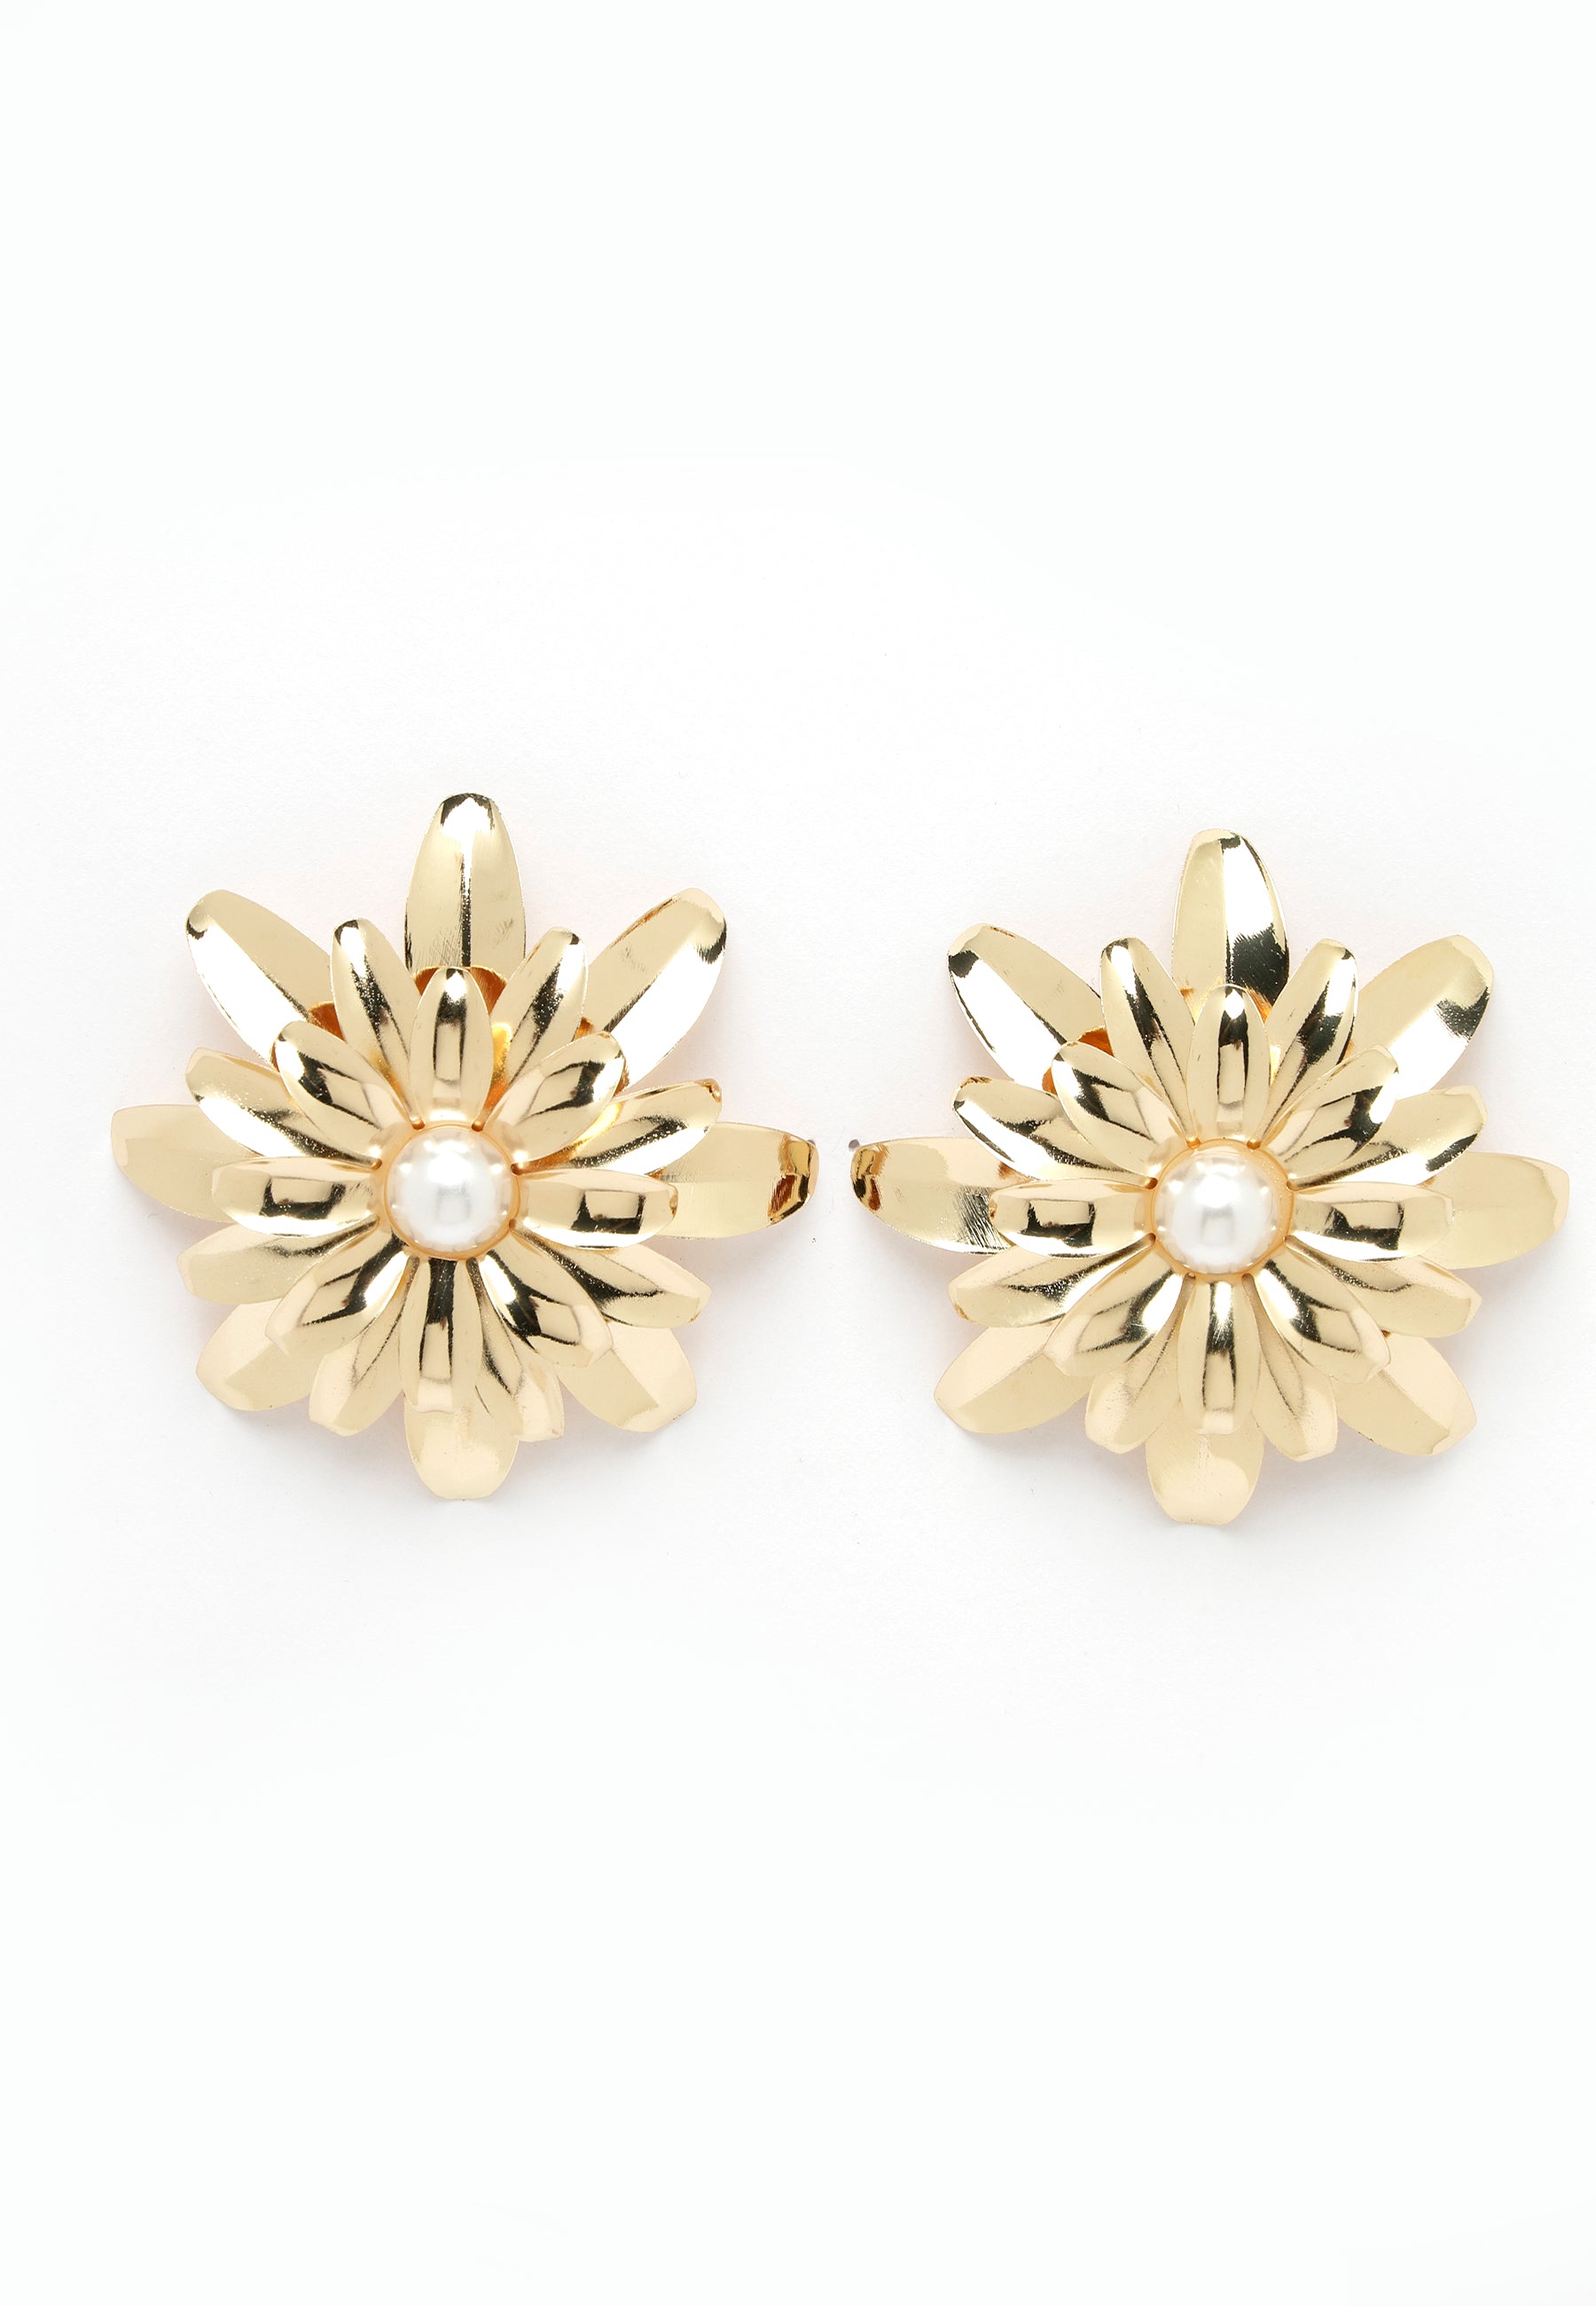 Gold-Colored Floral Stud Earrings